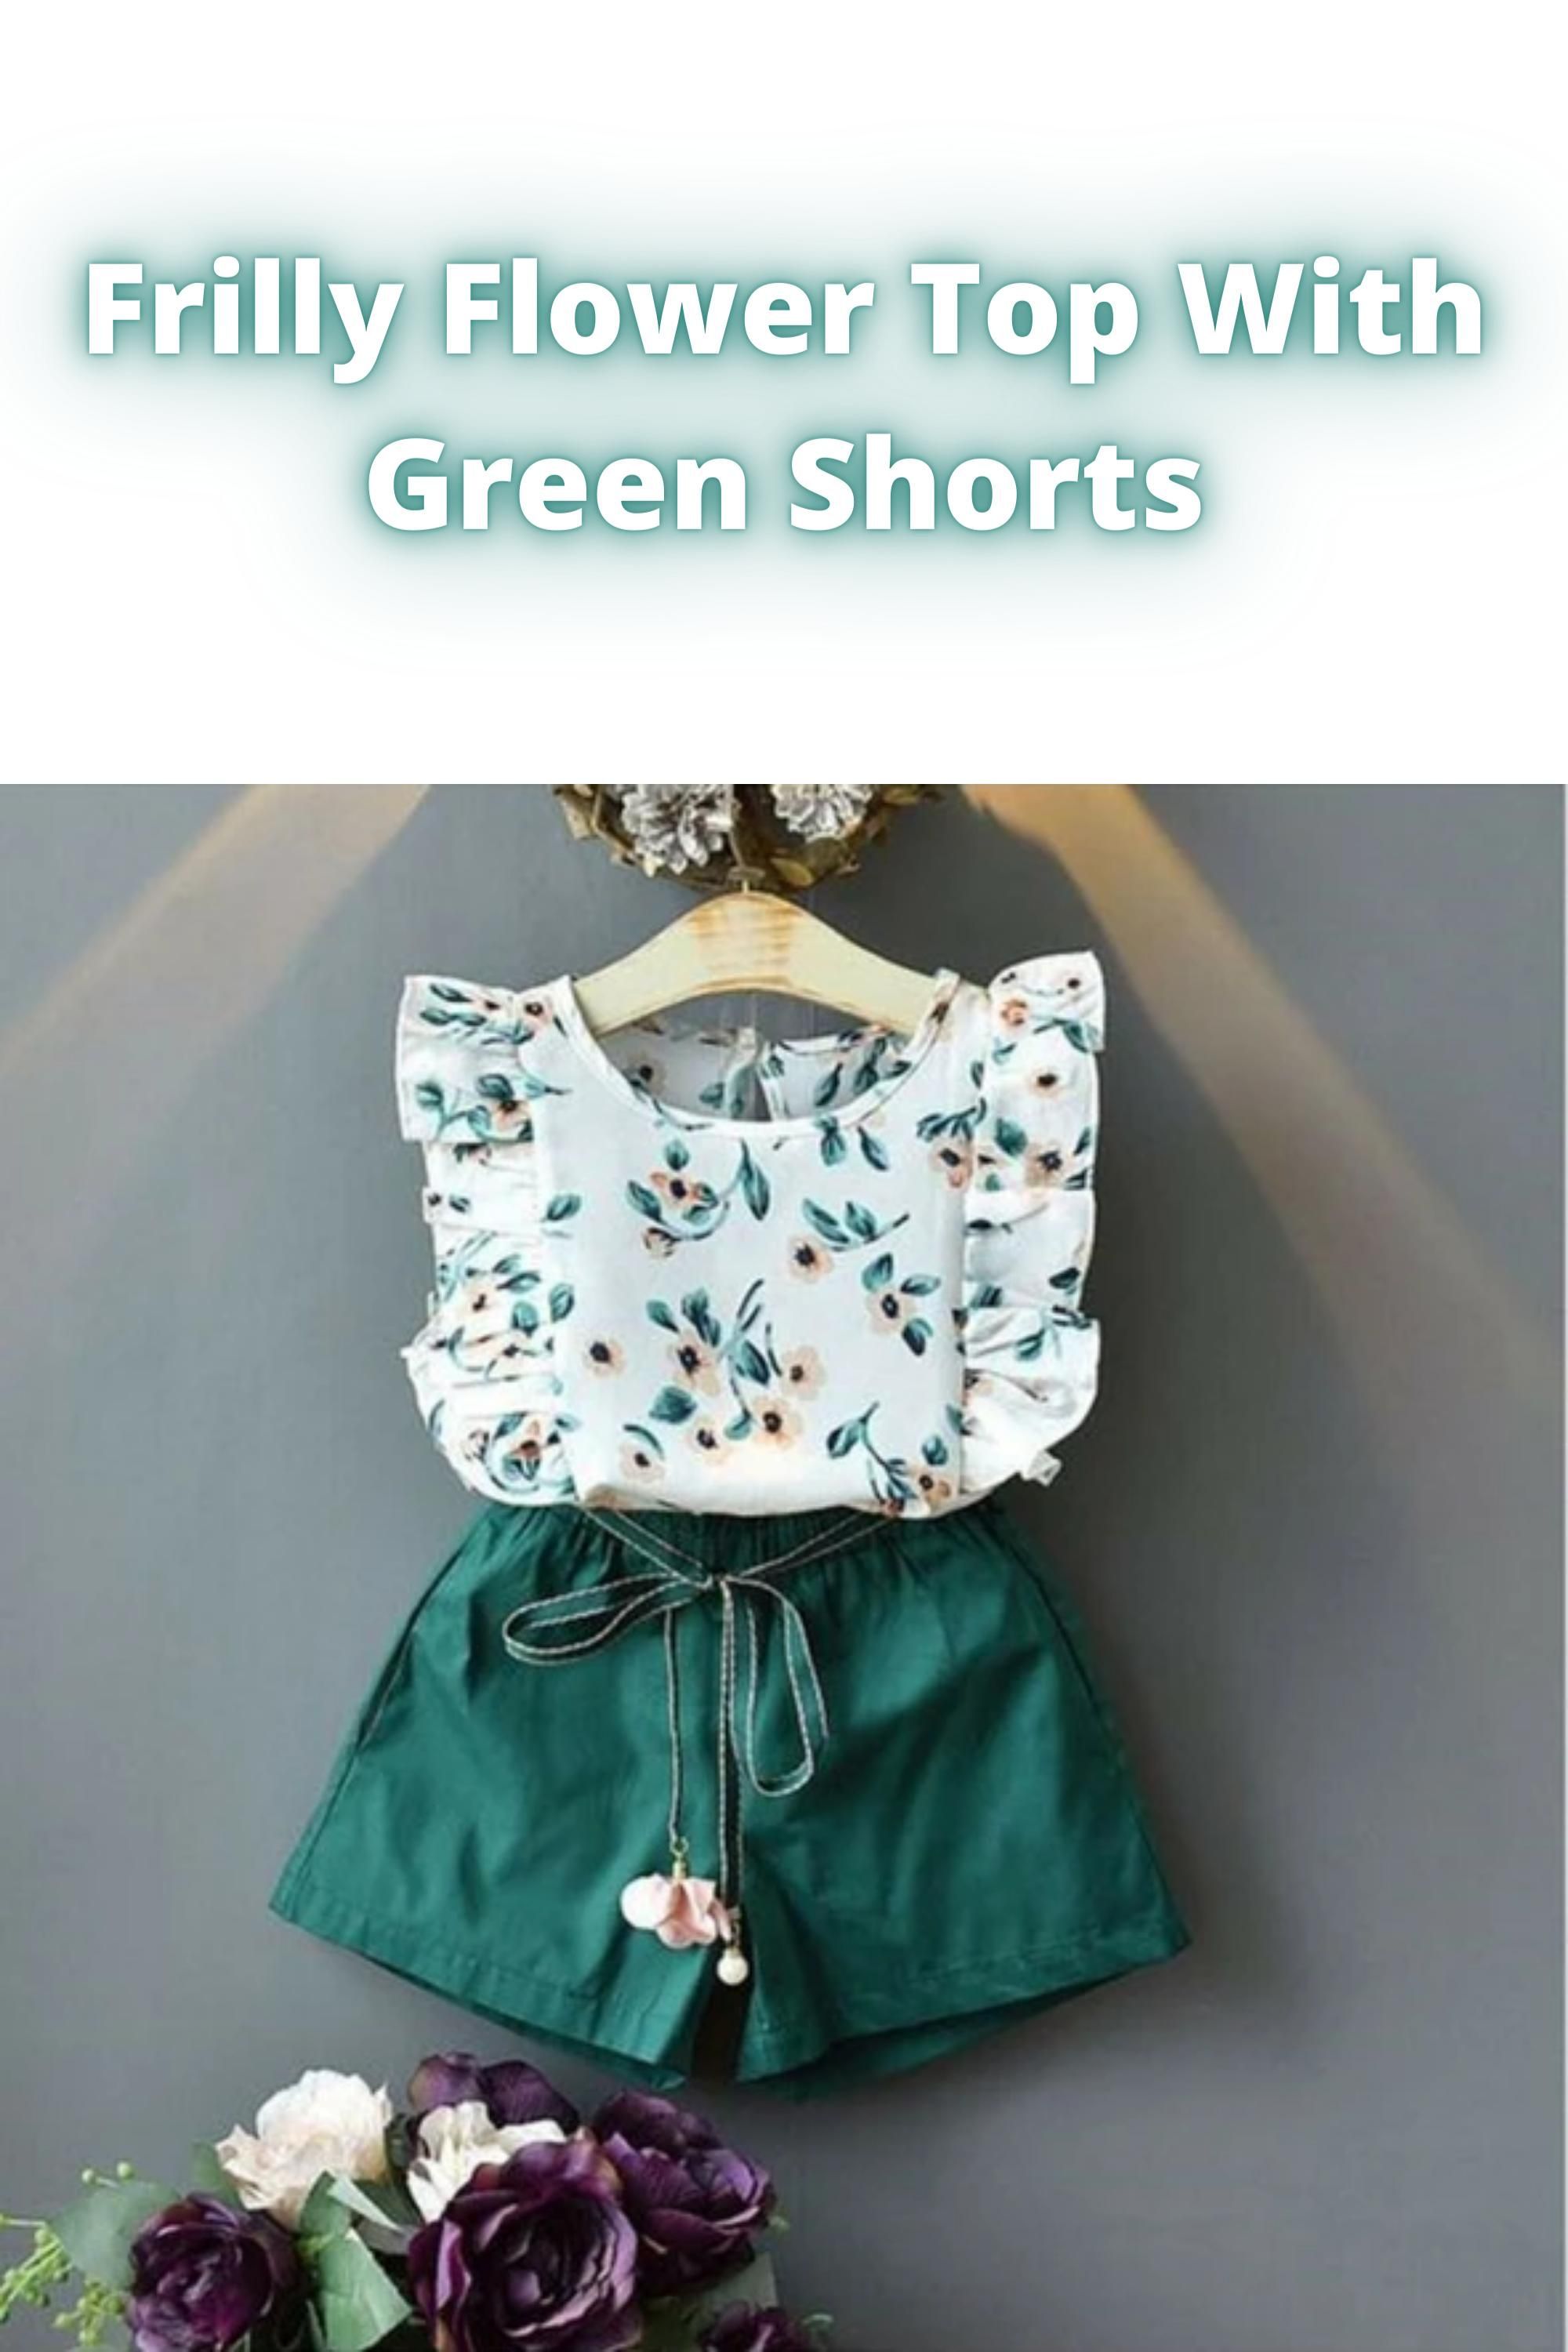 Frilly Flower Top With Green Shorts -   fitness Clothes for kids